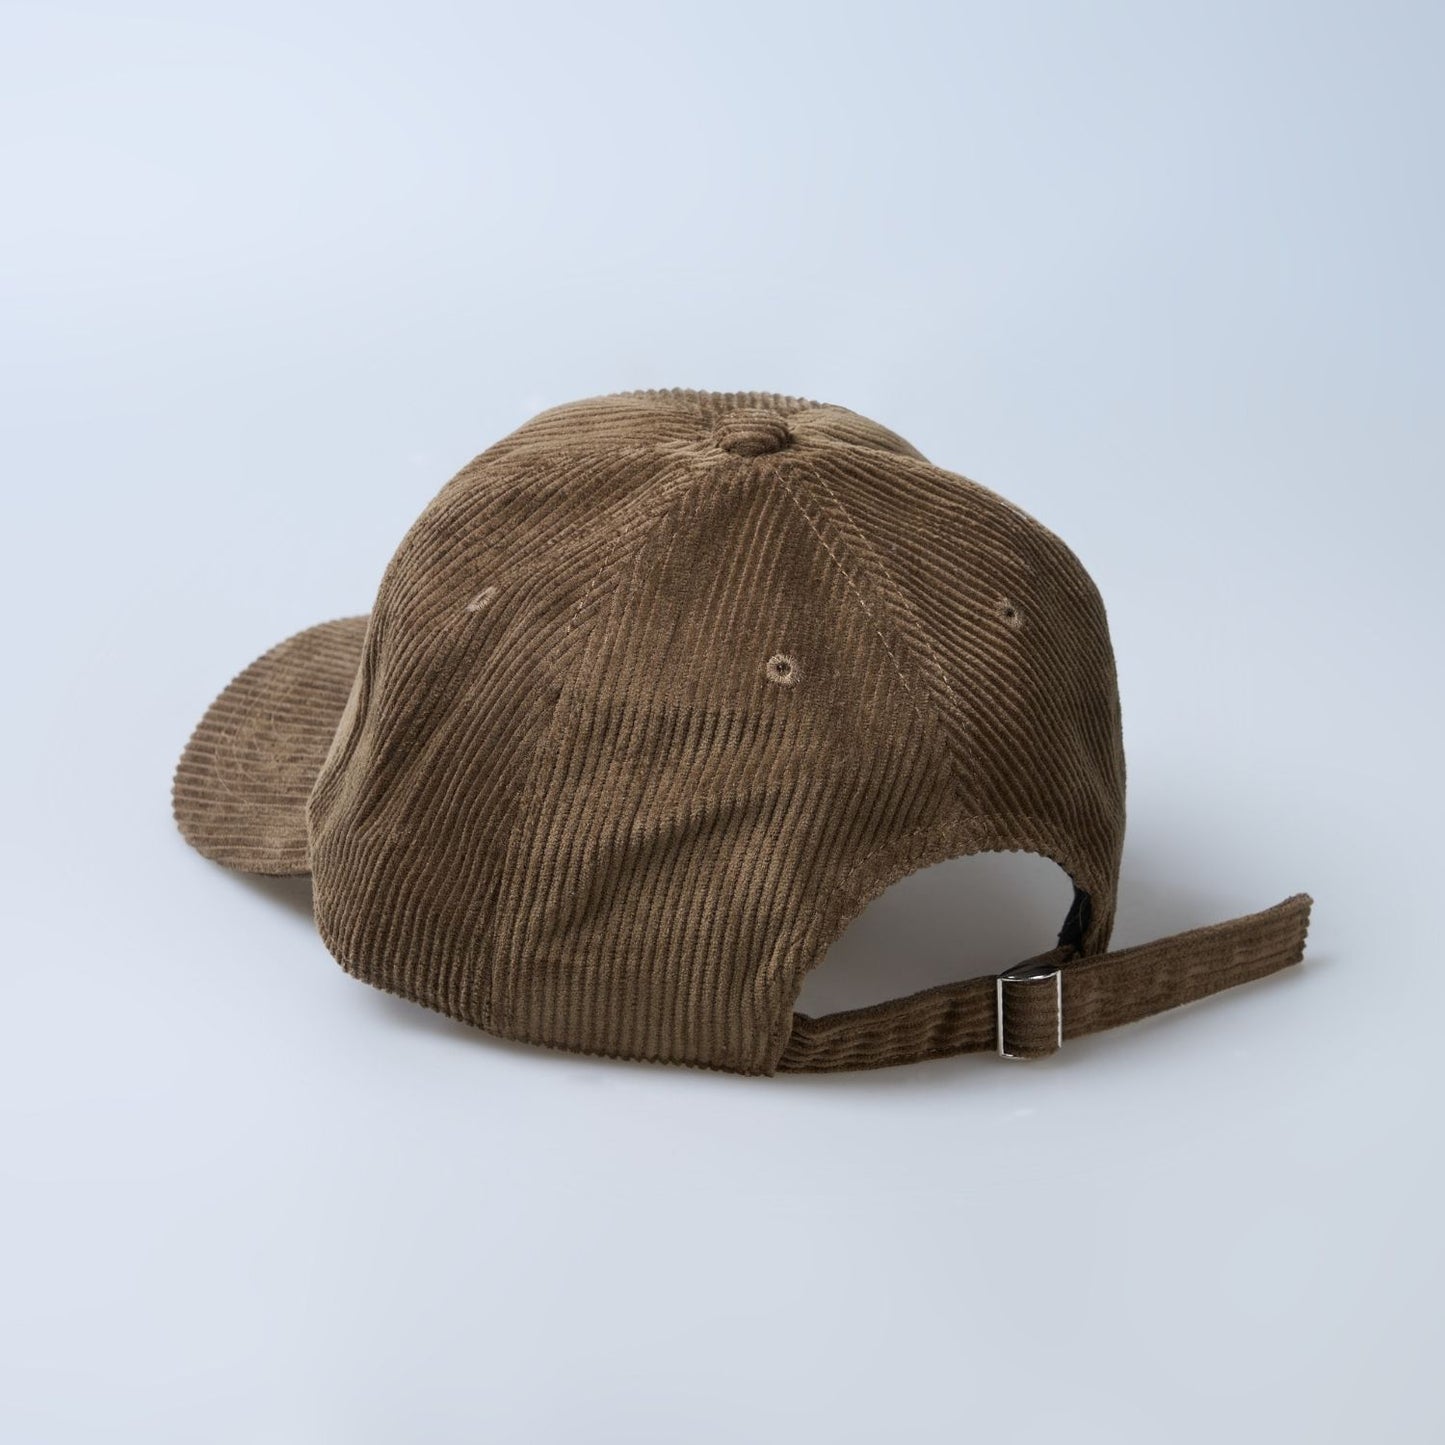 Brown colored cap for men with 'what' text written on it, back view.